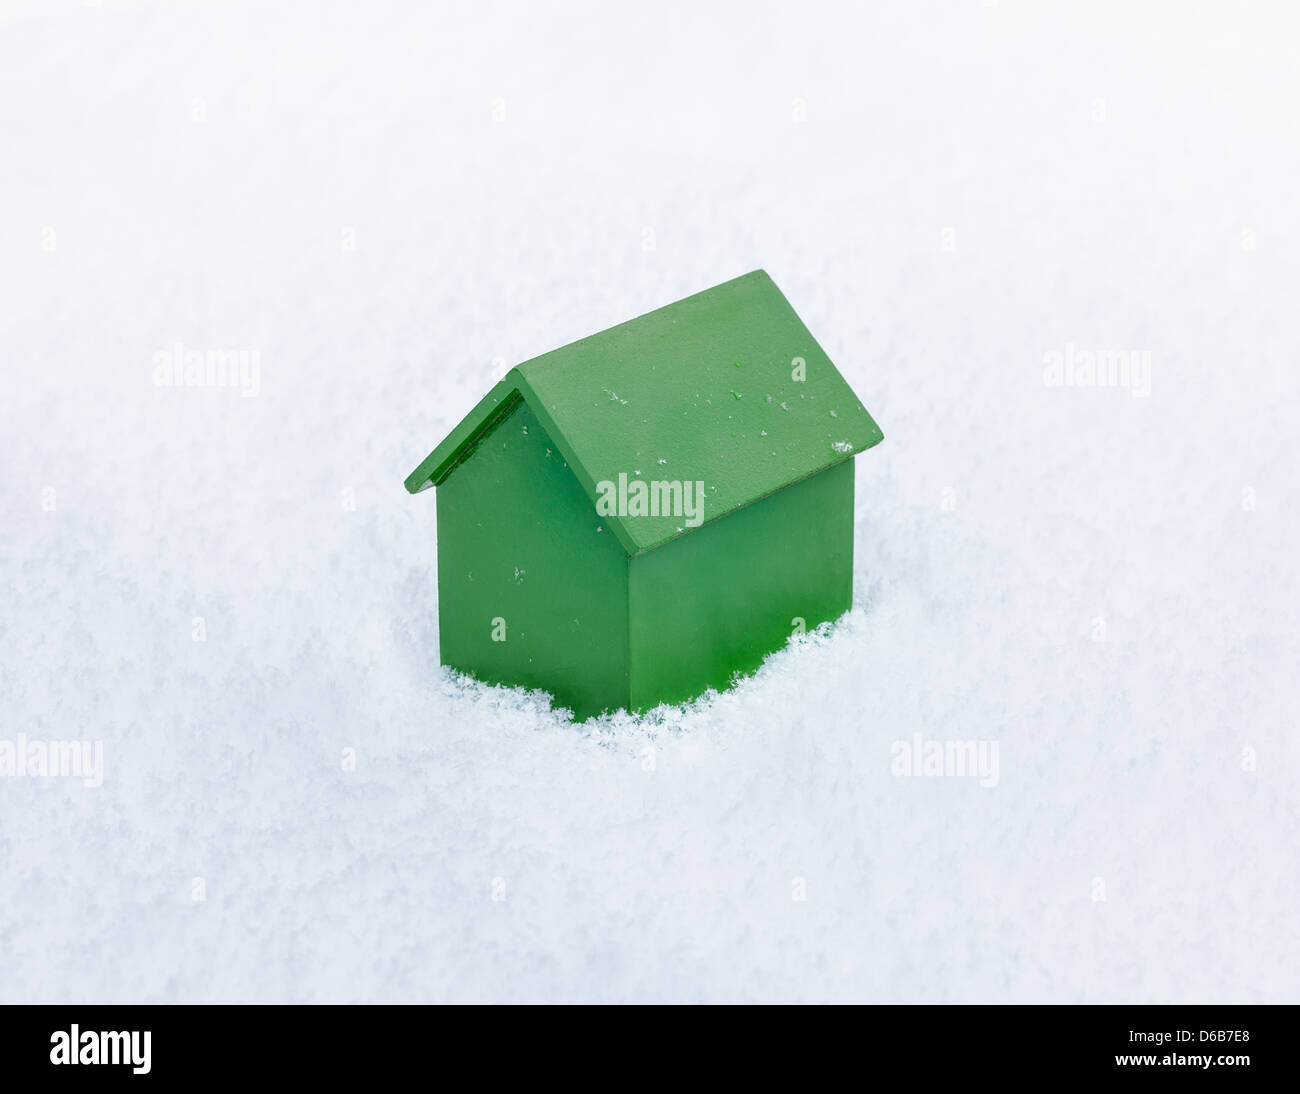 Model house sitting in snow Banque D'Images